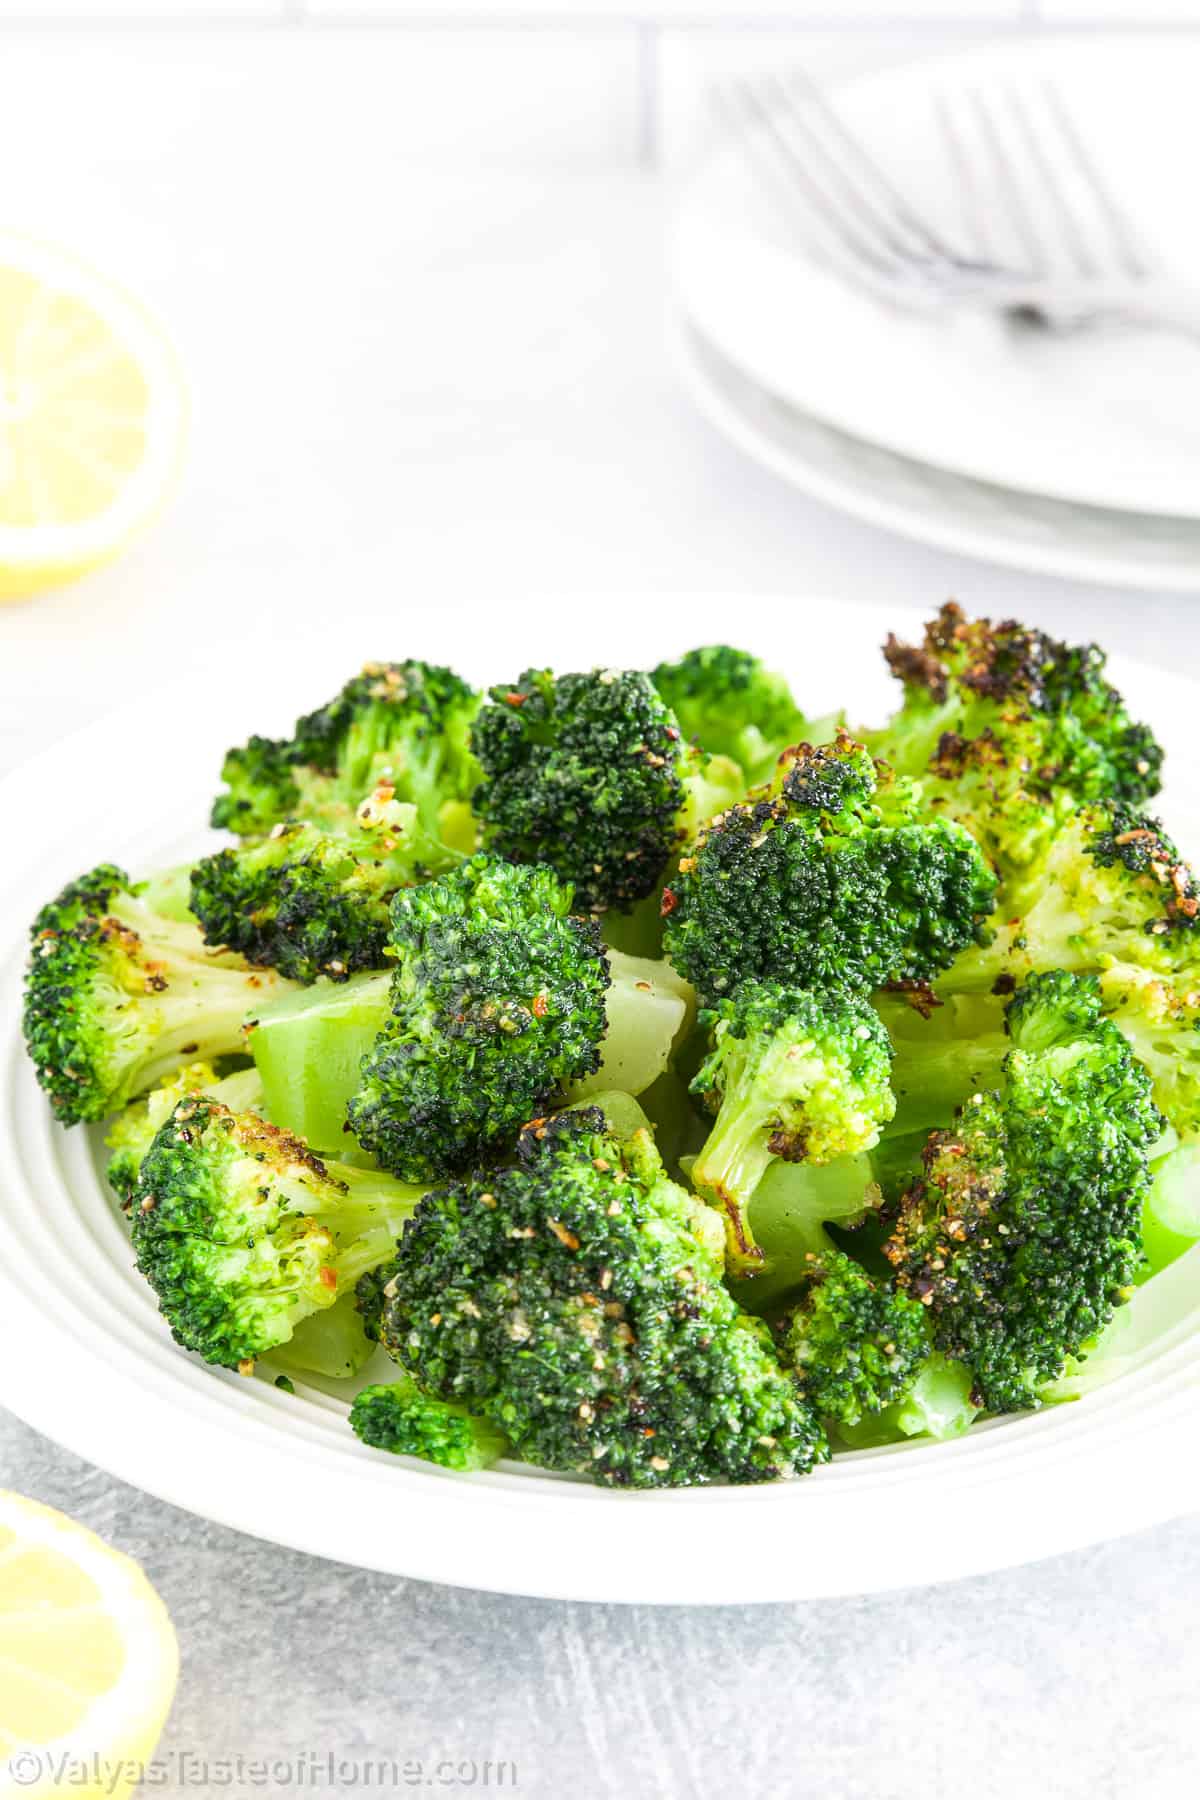 This broccoli is a hit with both kids and adults alike. It's crispy, flavorful, and makes a perfect side dish for any family meal.